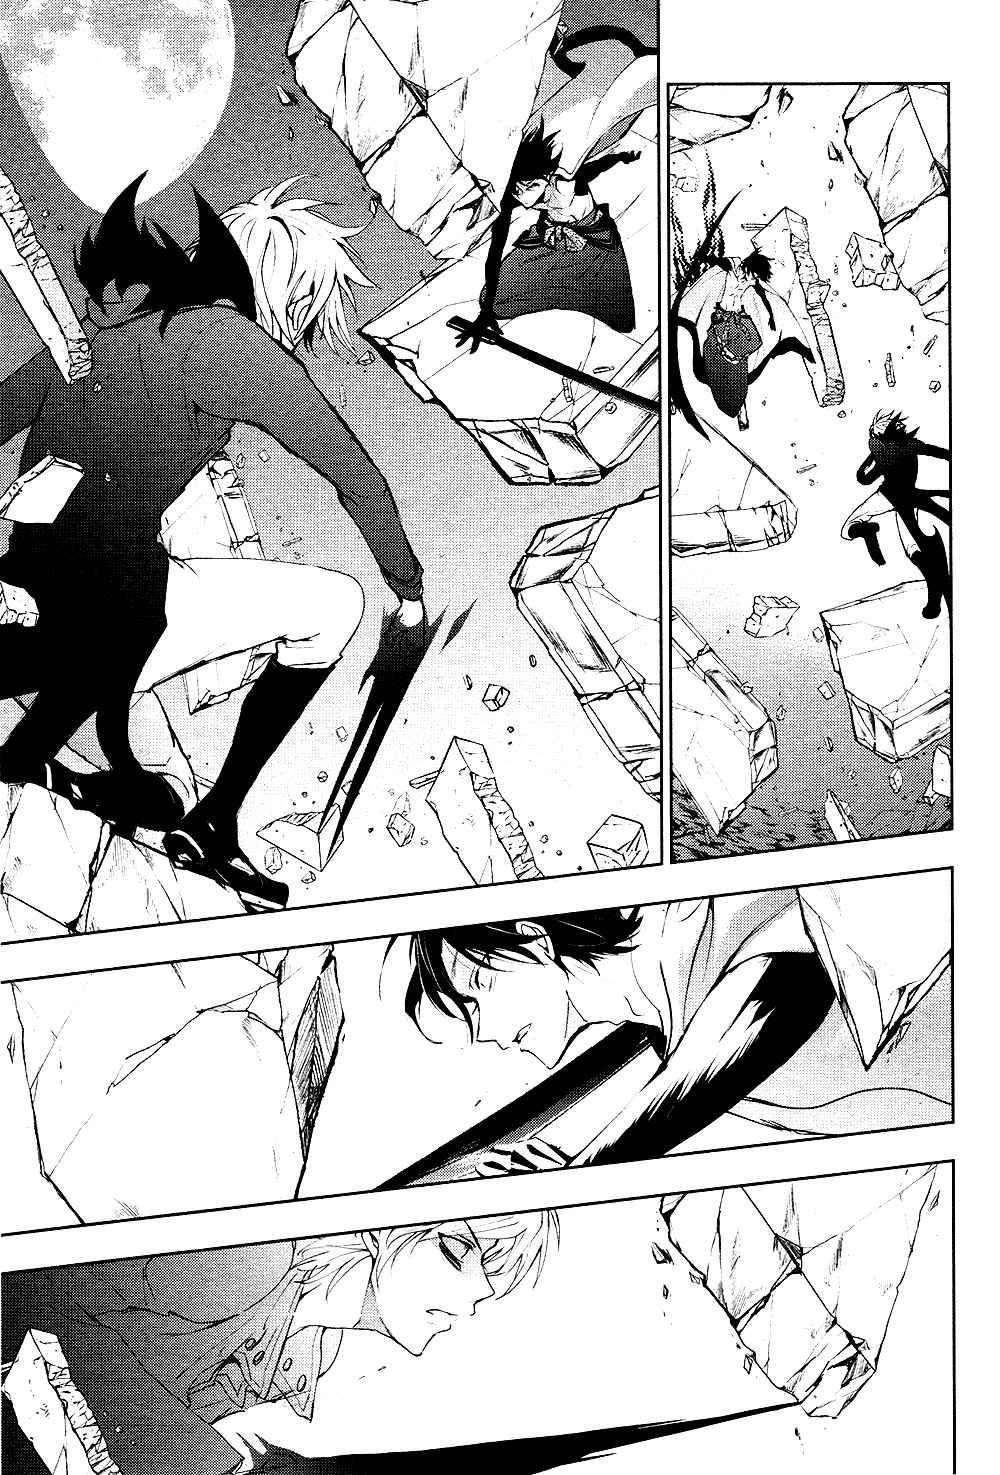 Servamp Vol. 15 Ch. 86 The Requirements of a Hero